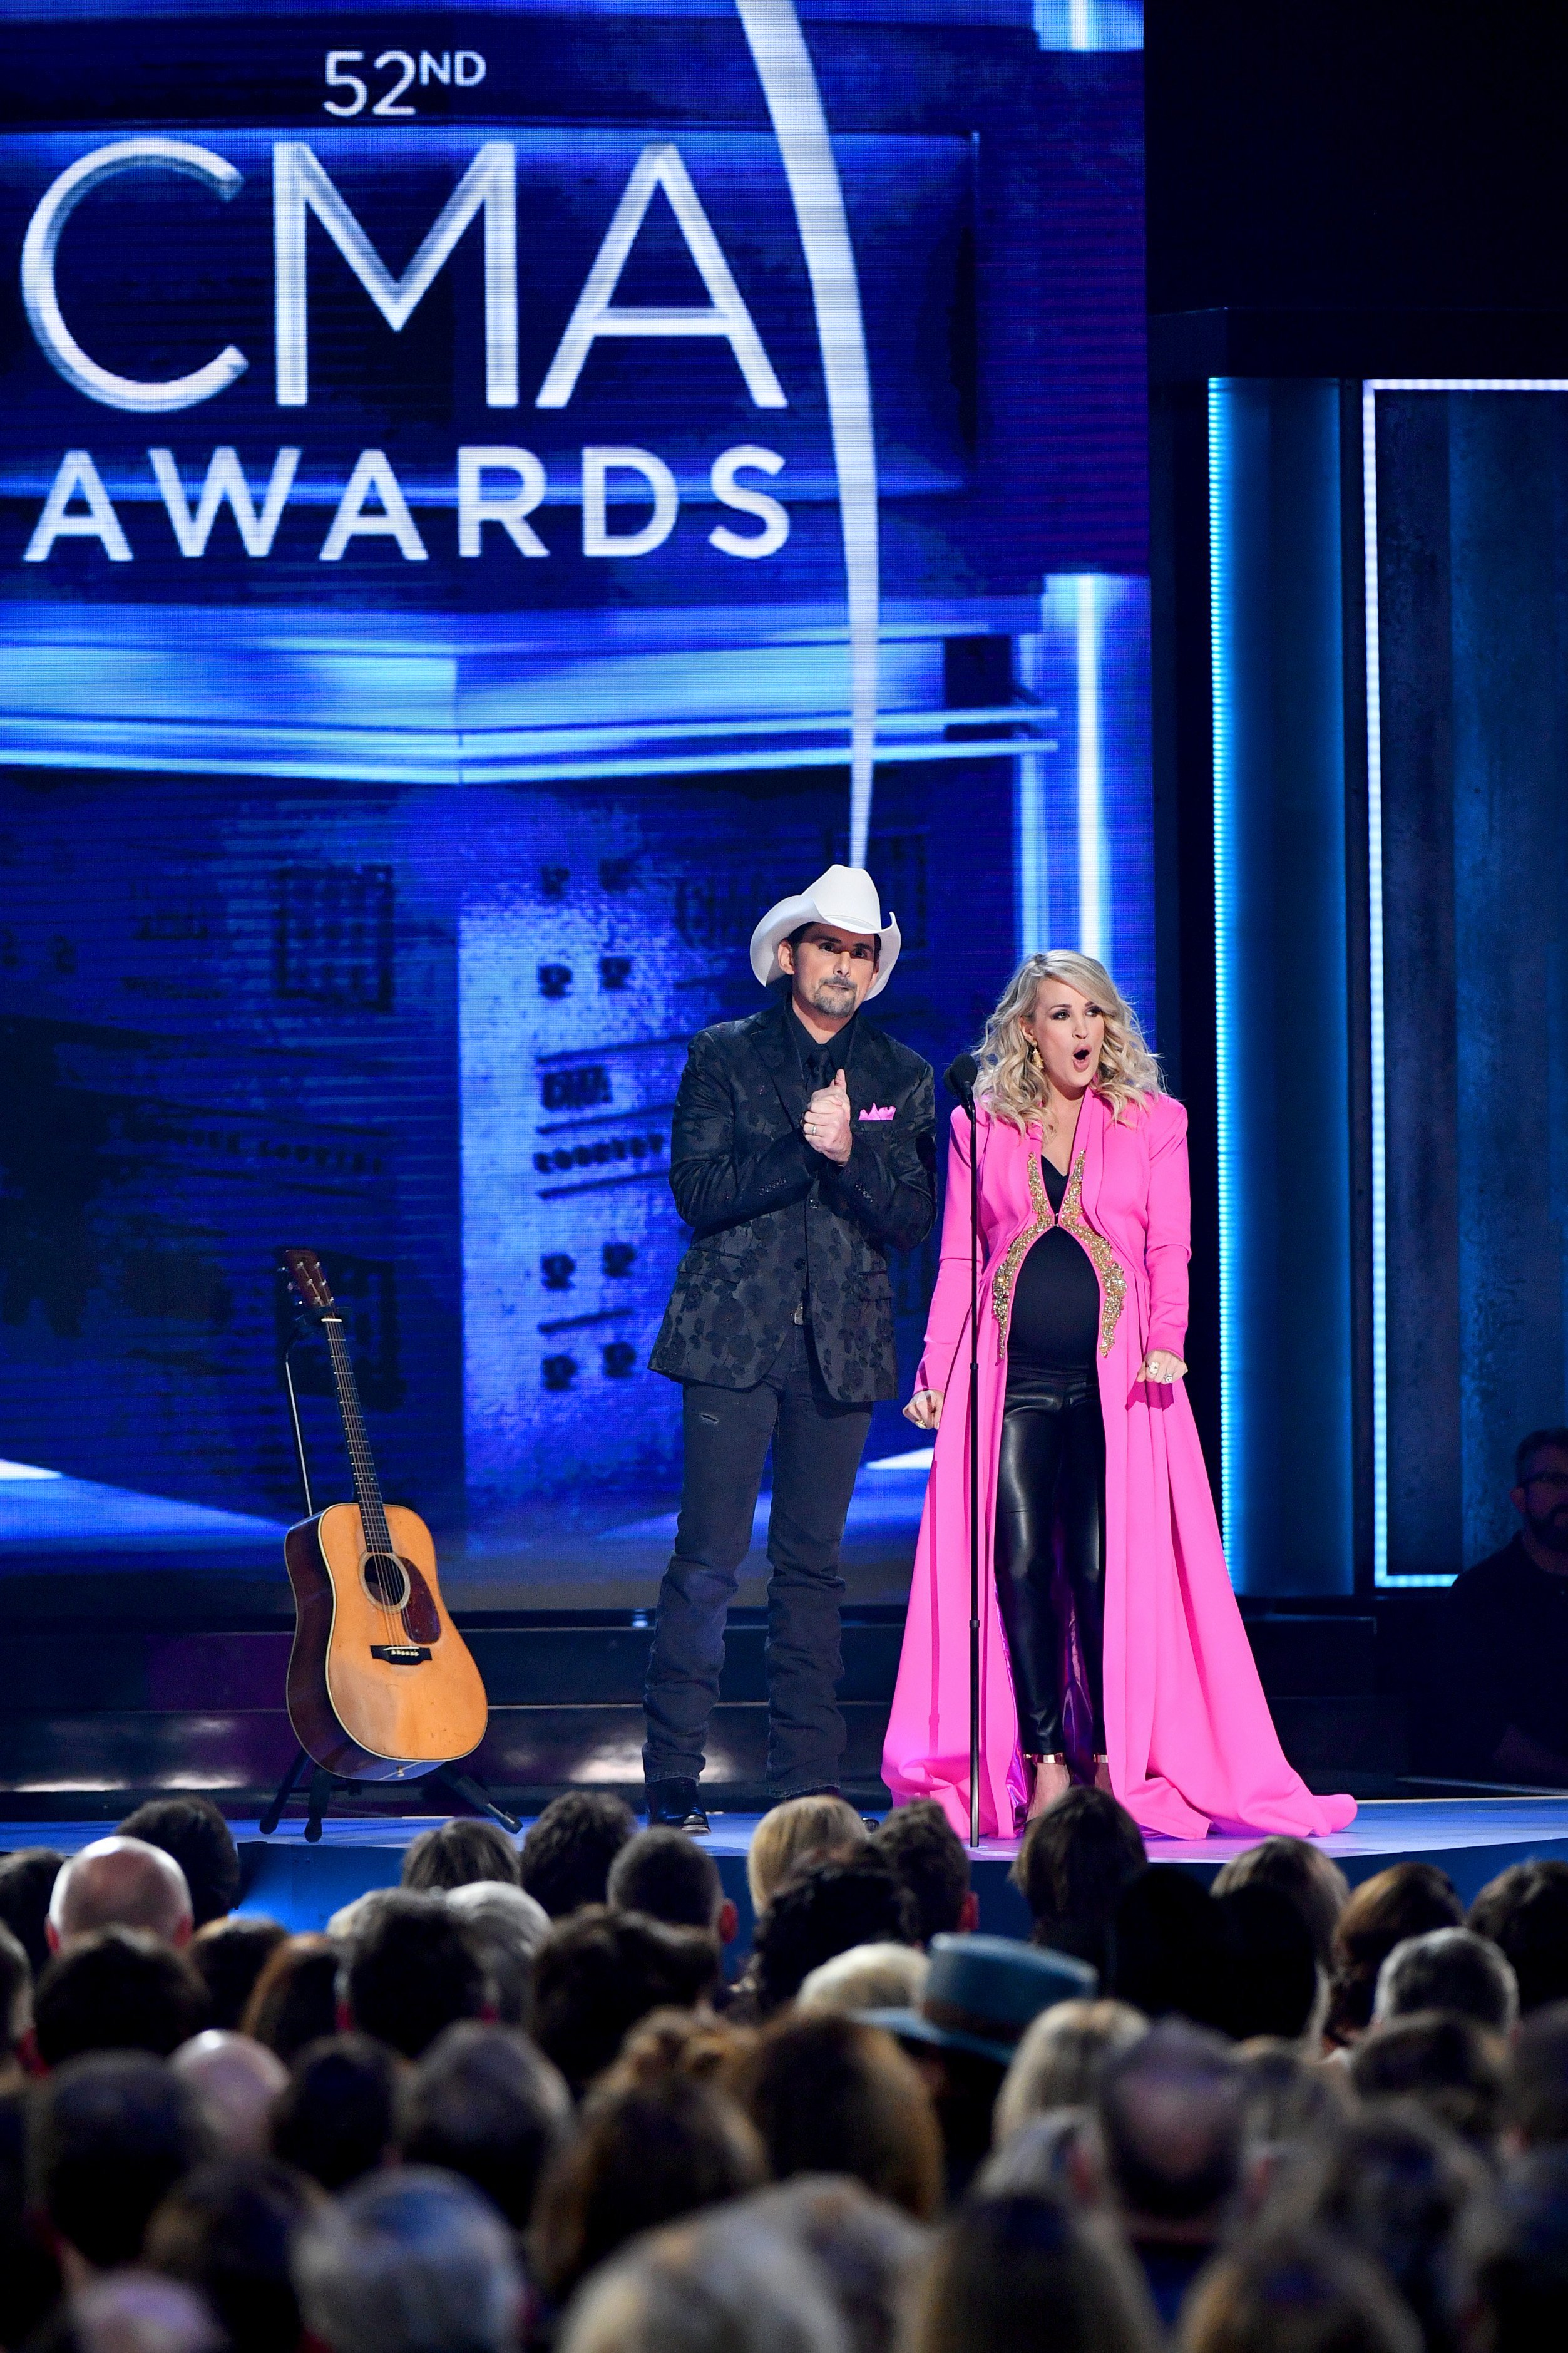 Brad Paisley and Carrie Underwood perform at the 52nd annual CMA Awards in Nashville, Tennesee on November 14, 2018 | Photo: Getty Images